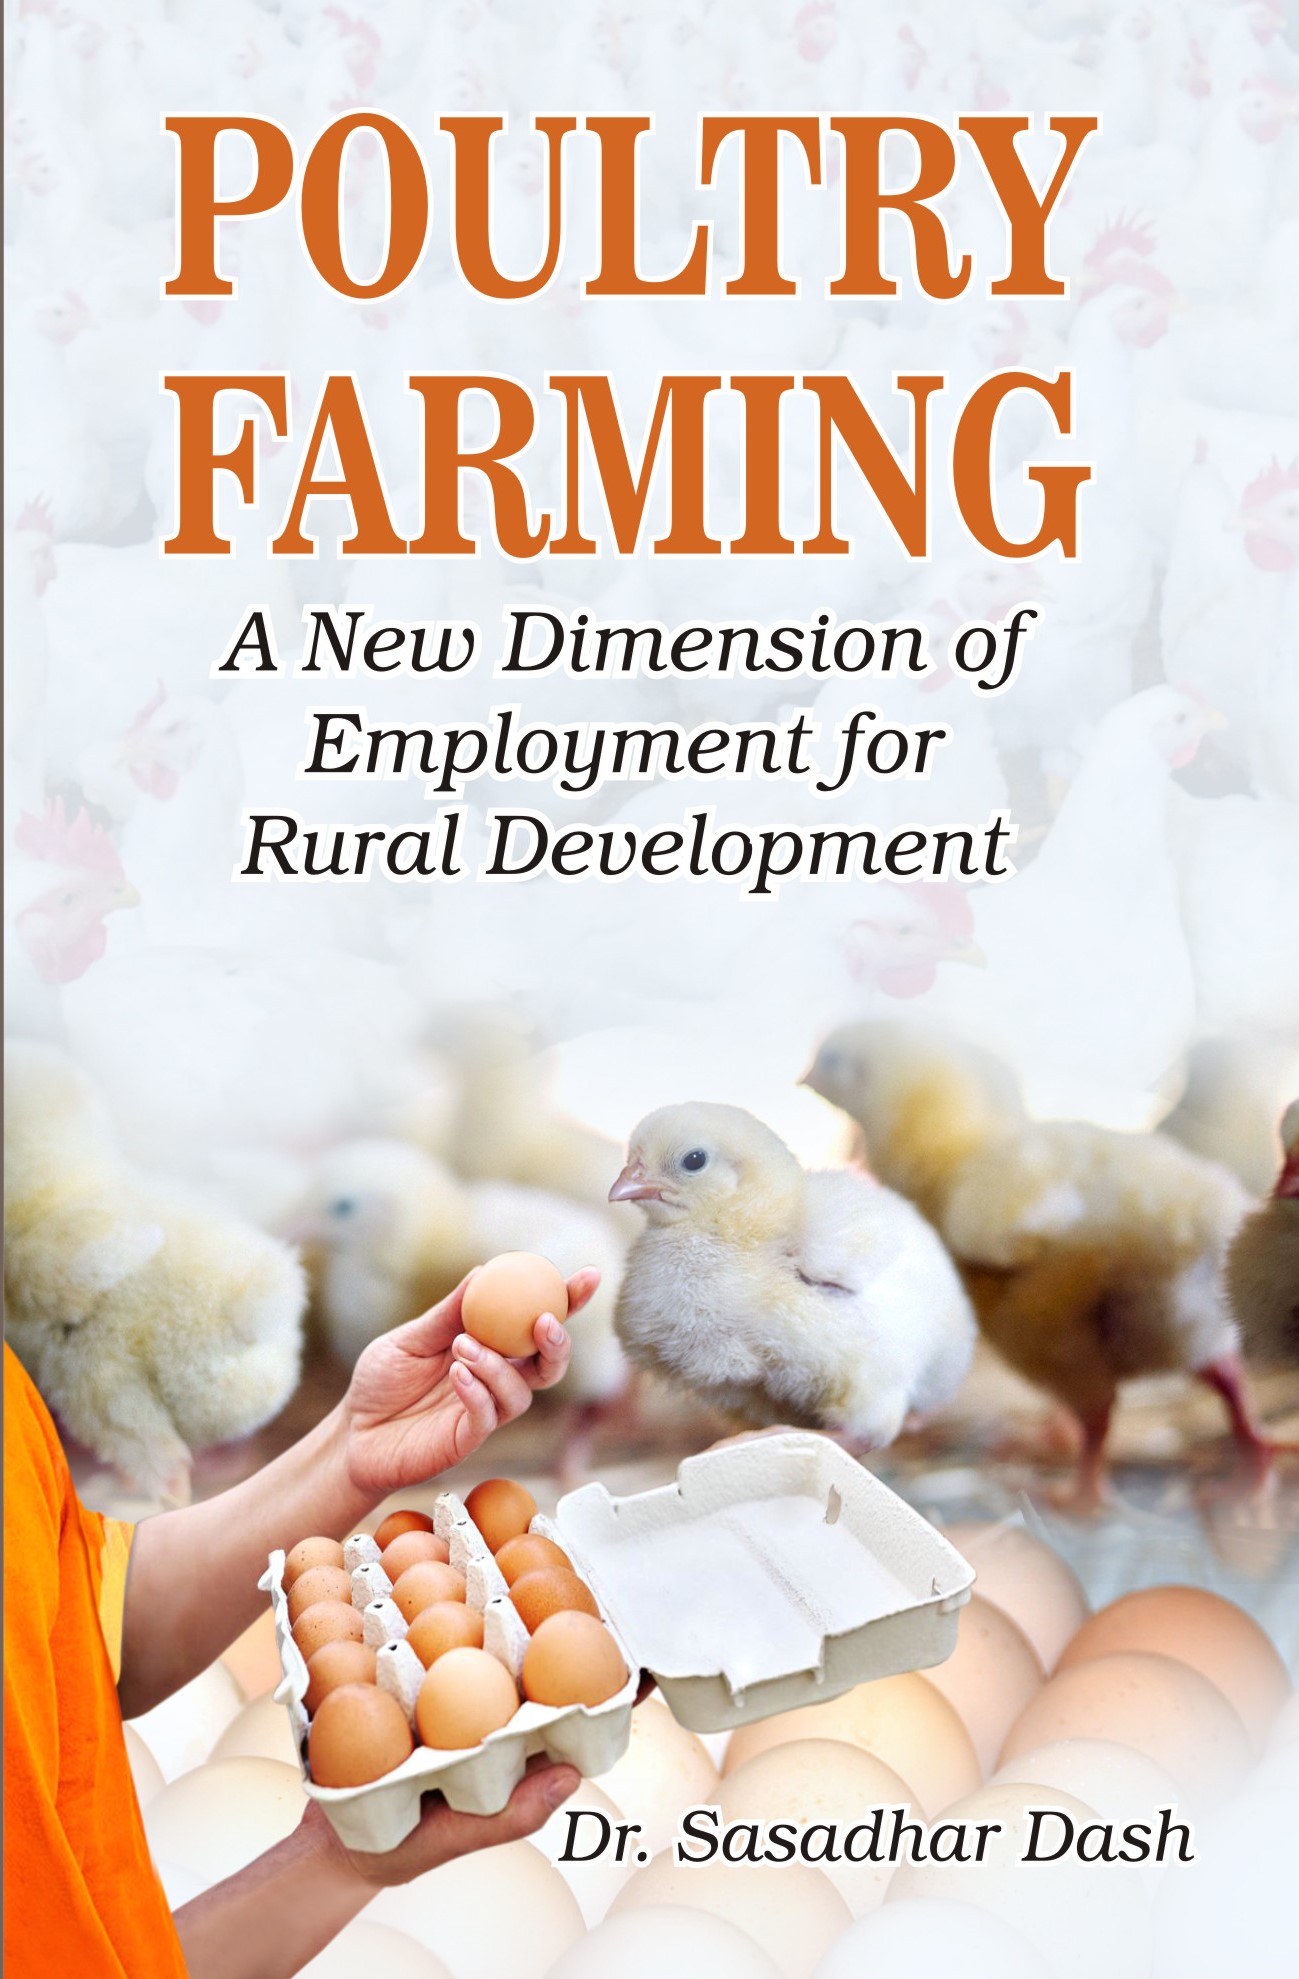 POULTRY FARMING - A NEW DIMENSION OF EMPLOYMENT FOR RURAL DEVELOPMENT